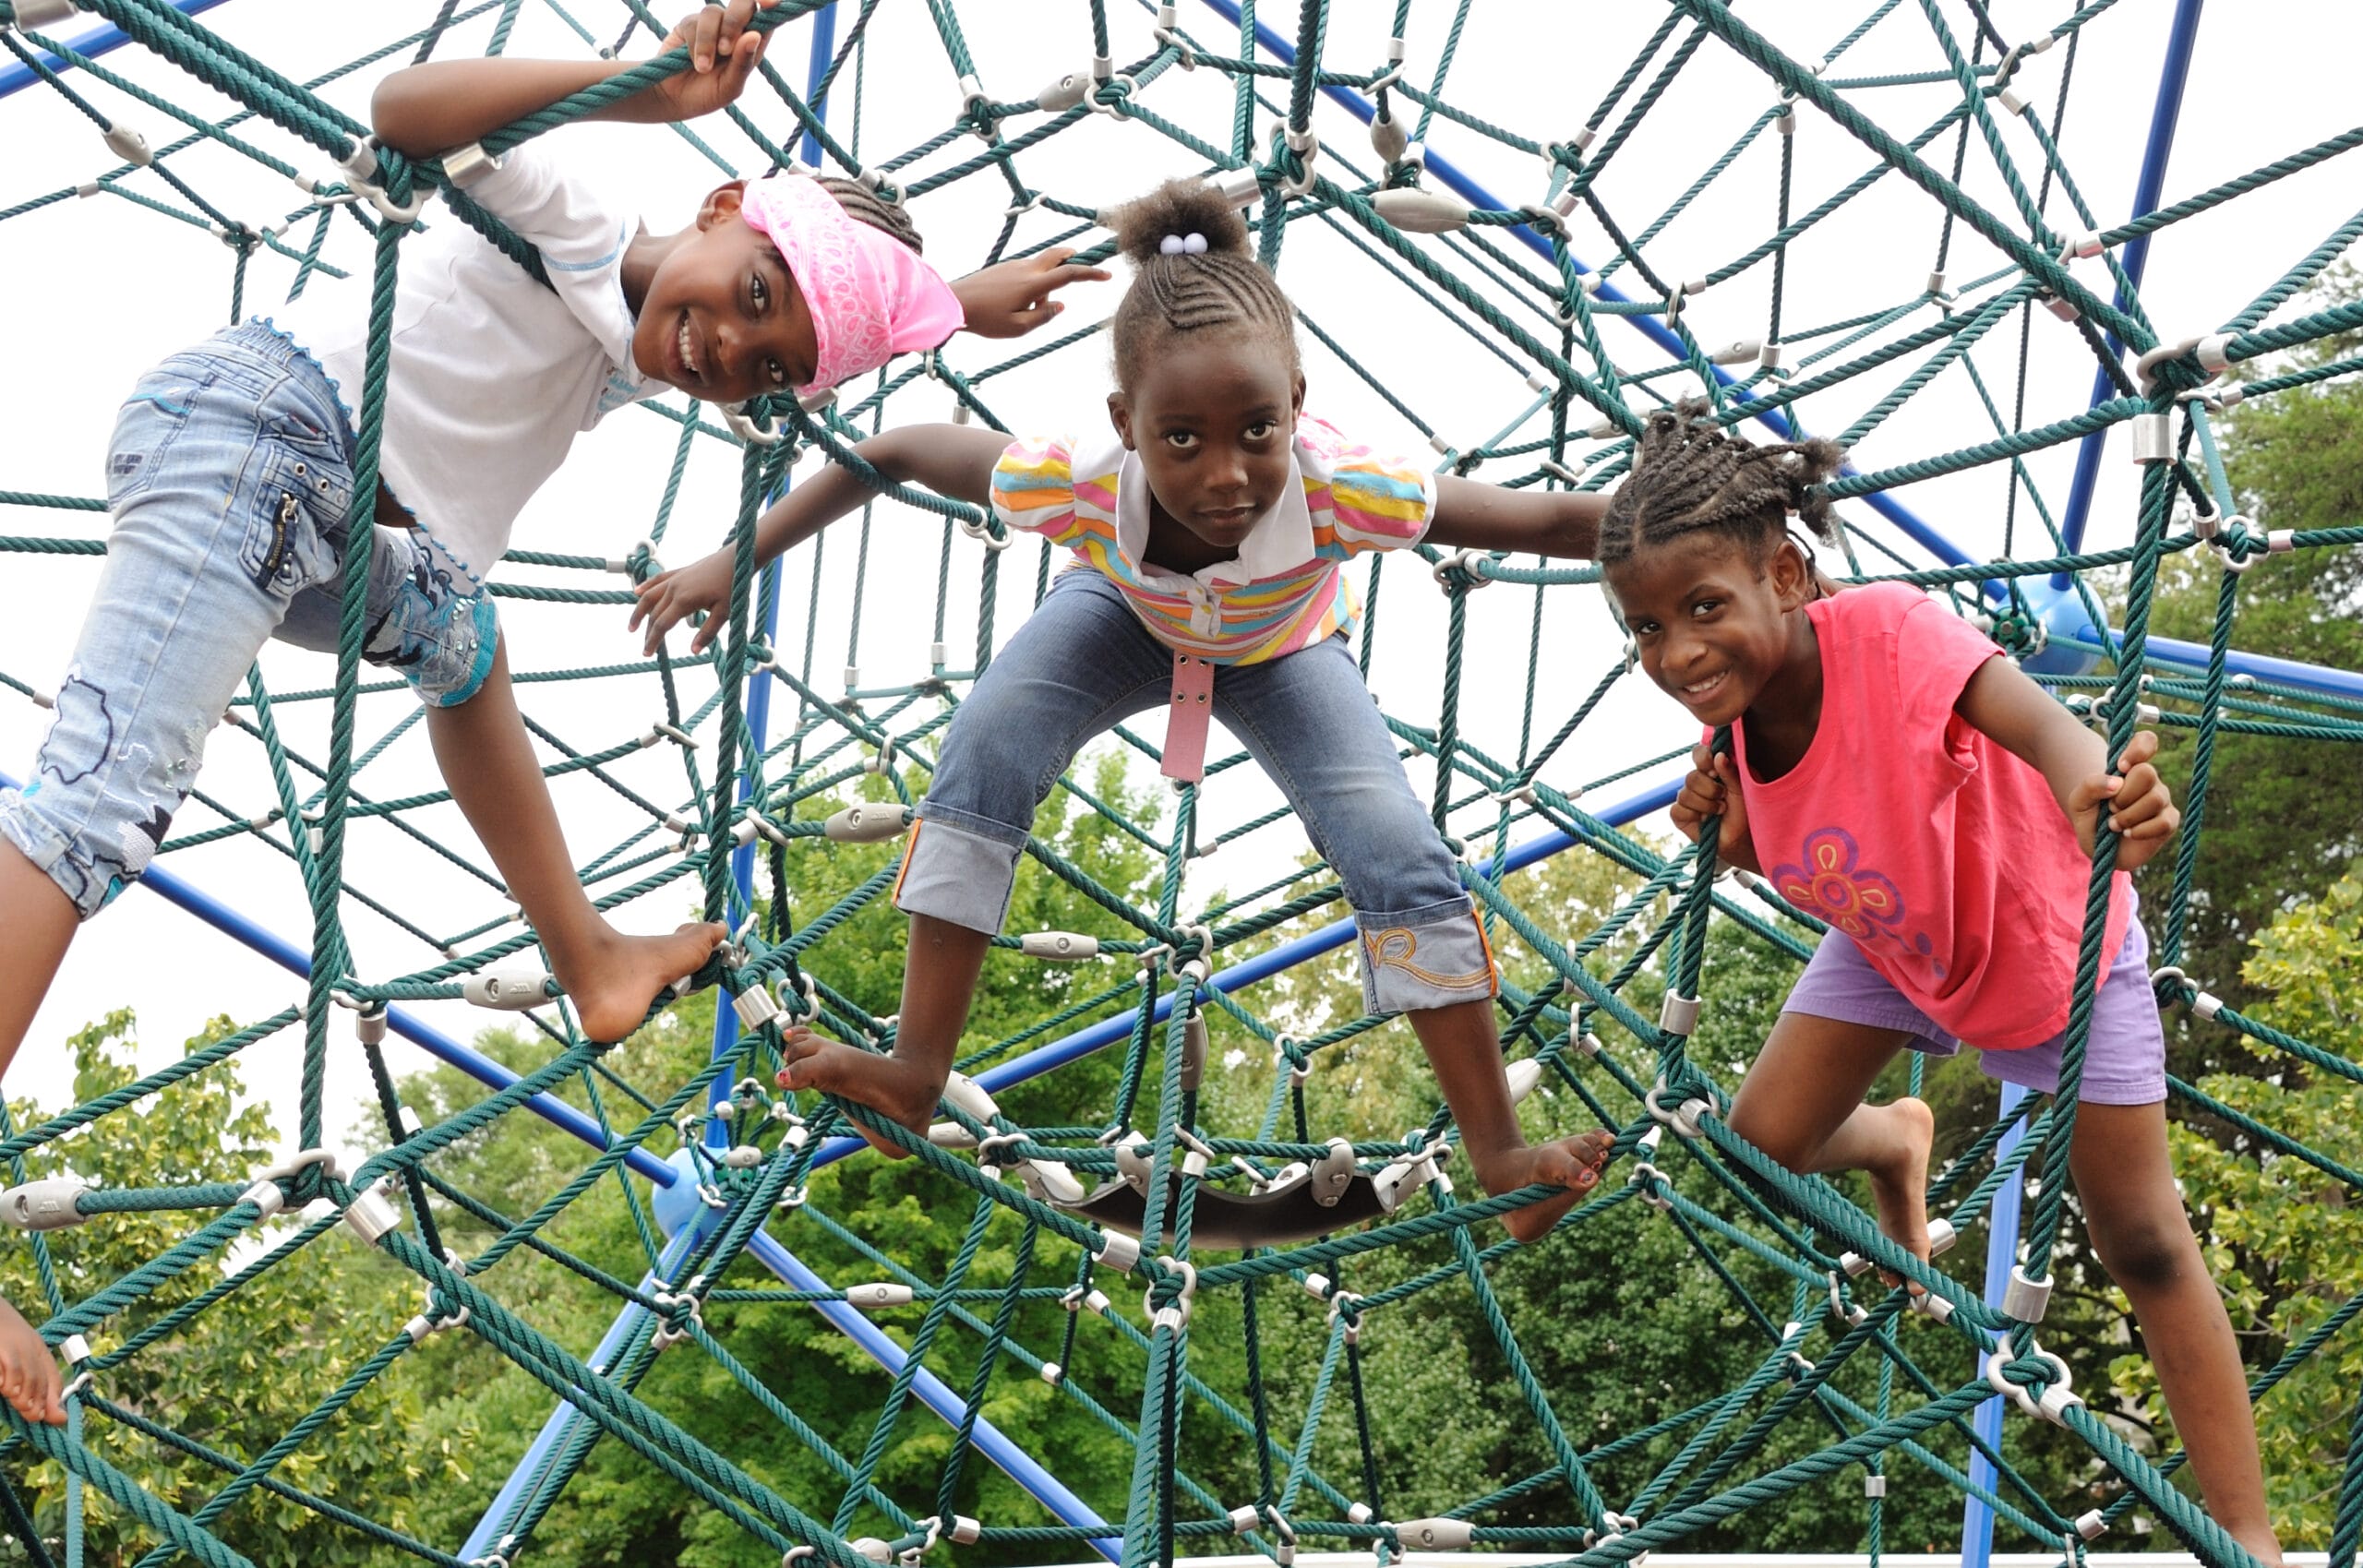 Three young girls playing on a playground structure.